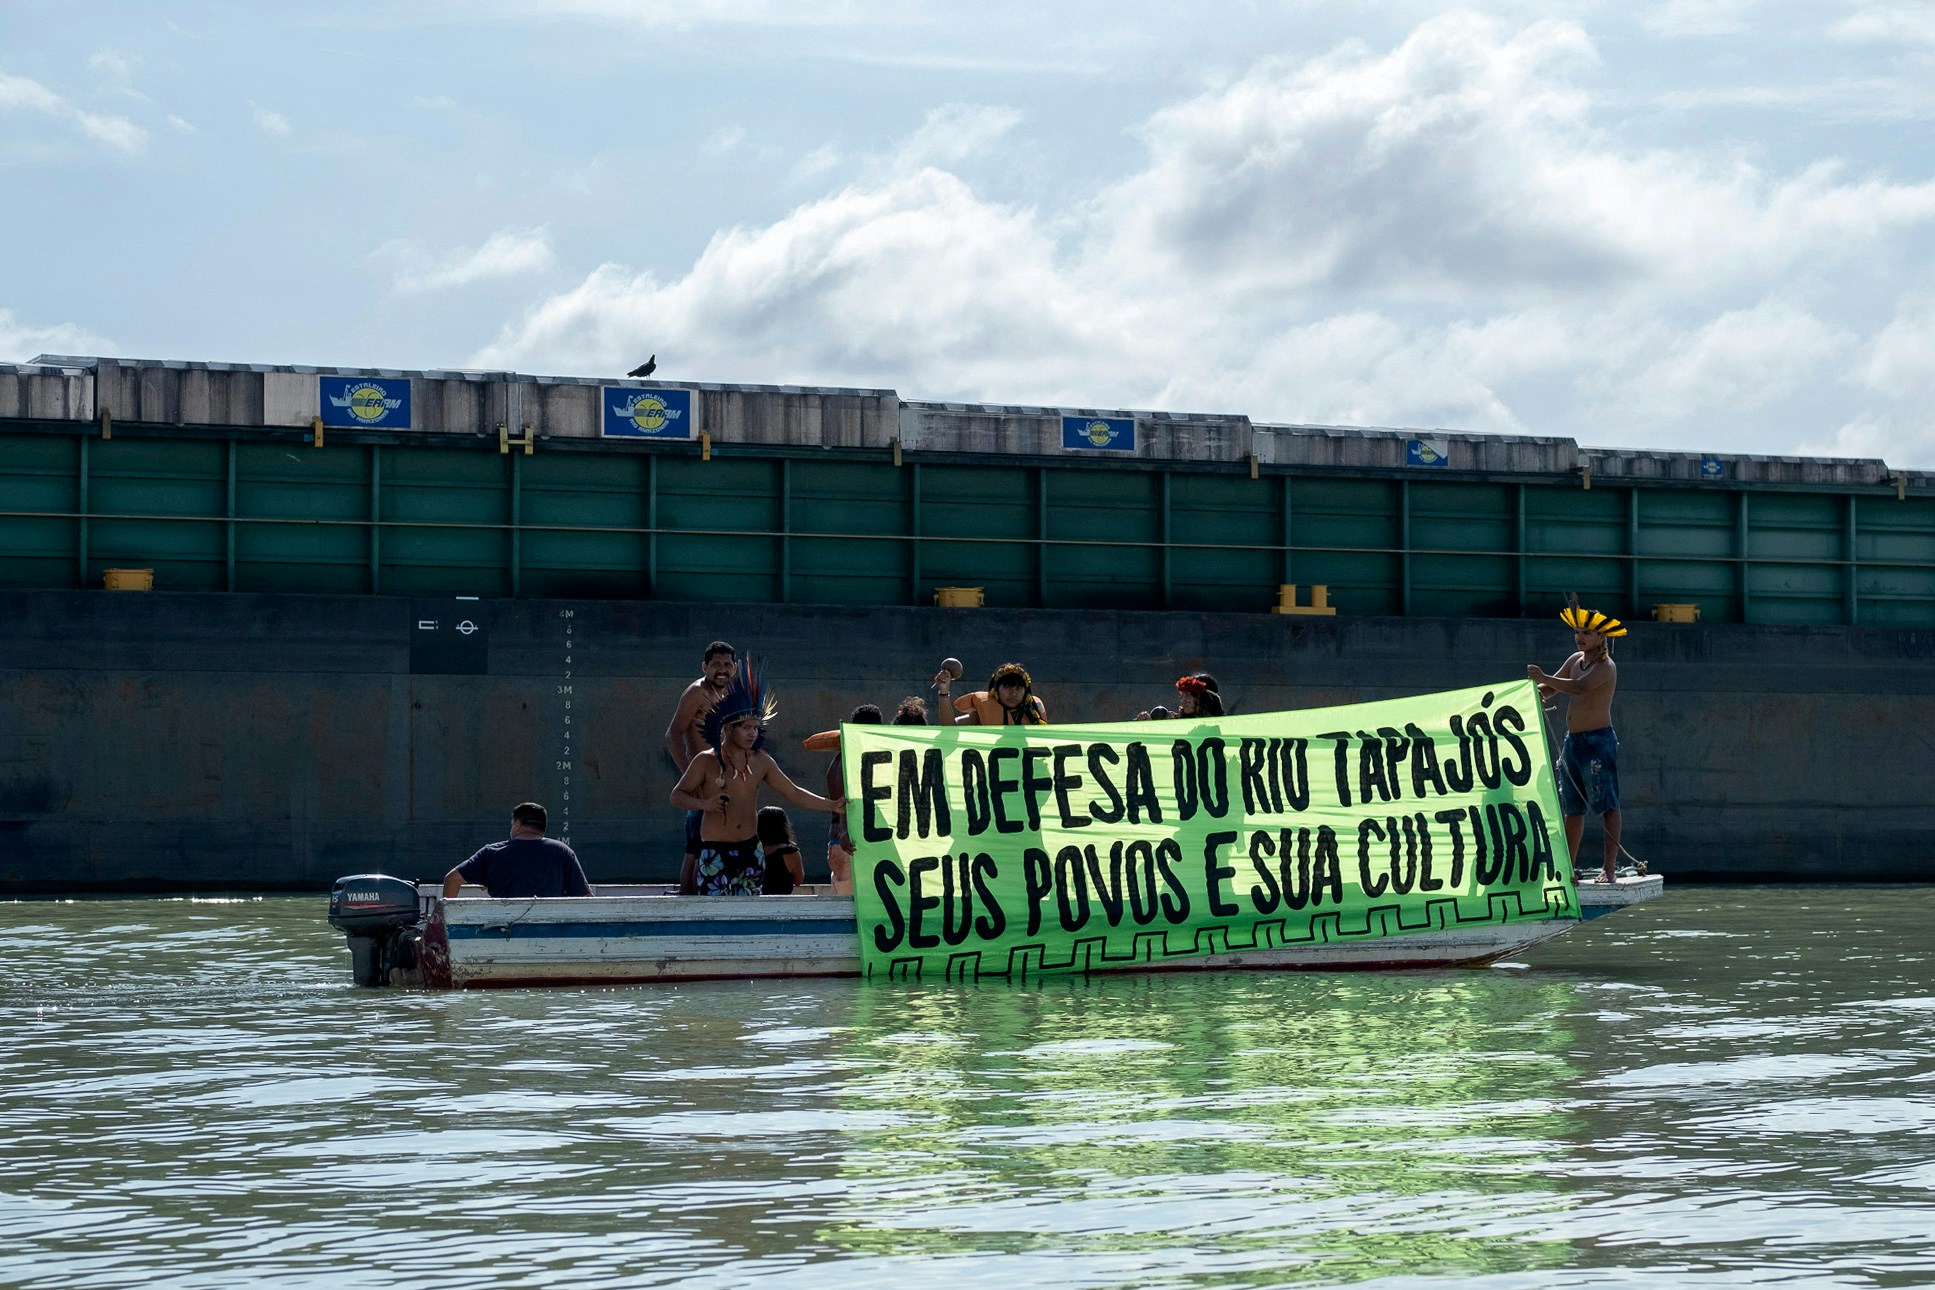 Indigenous protestors from the Tupinamba tribe display a banner reading In defense of the Tapajos river, its people and their culture during a protest over environmental concerns and land rights, on a boat on the Tapajos river, in Santarem, Para state, Brazil, on November 13, 2021. (Photo by Leondro MILANO / AFP) (Photo by LEONDRO MILANO/AFP via Getty Images)